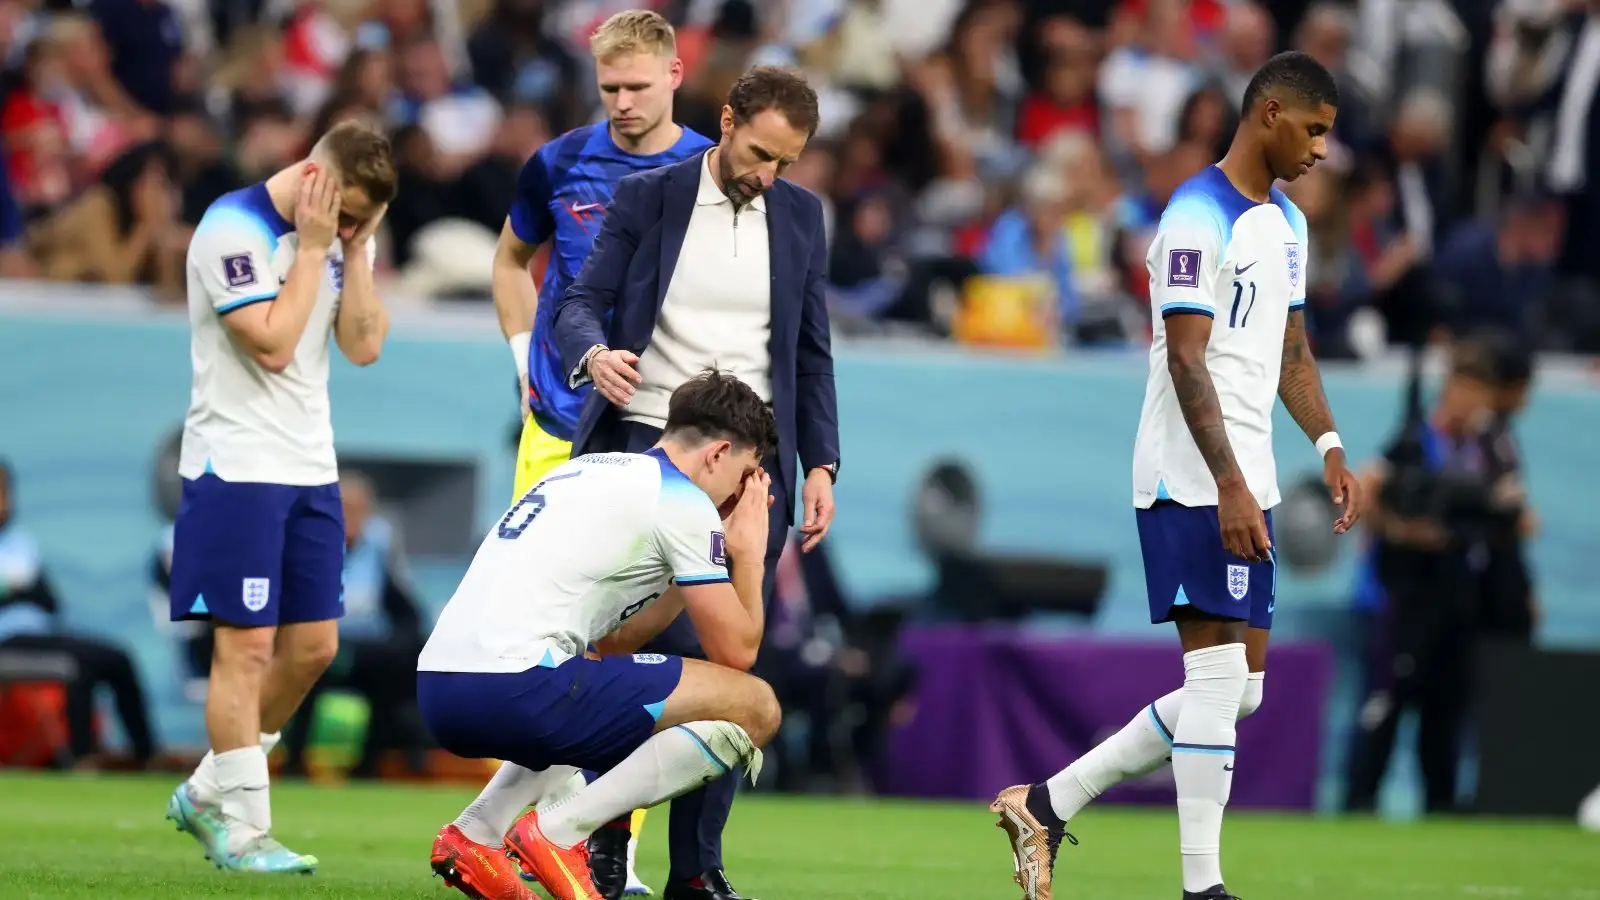 Argentina manager urges players to keep 'chin up' after stunning